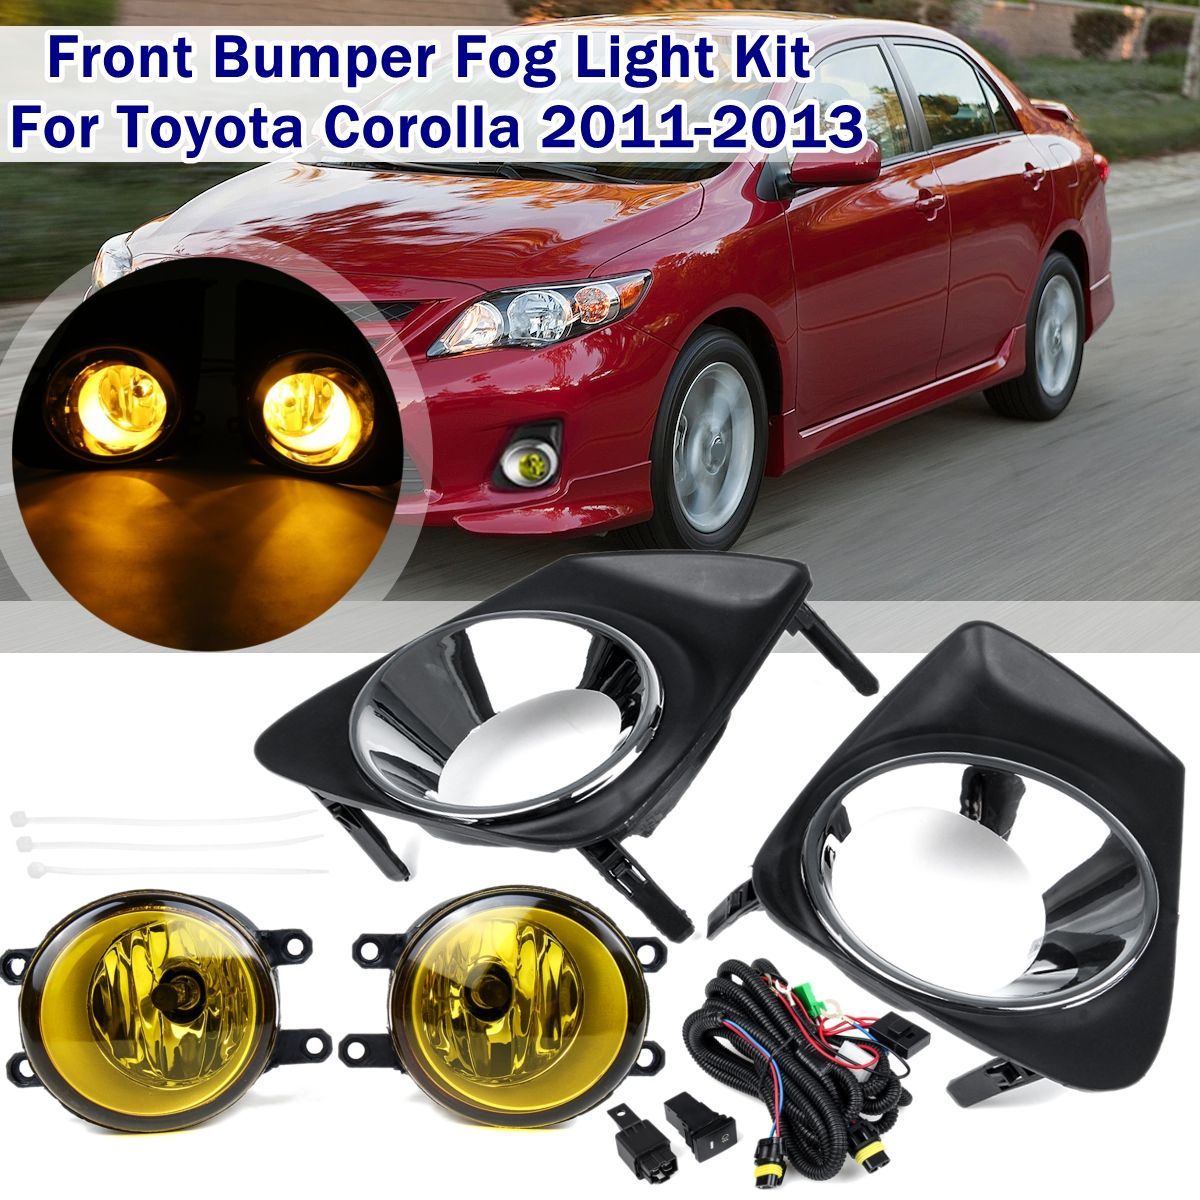 Car-Front-Bumper-Fog-Lights-Lamp-with-H11-Bulb-Switch-Kit-Pair-For-Toyota-Corolla-2011-2013-1557319